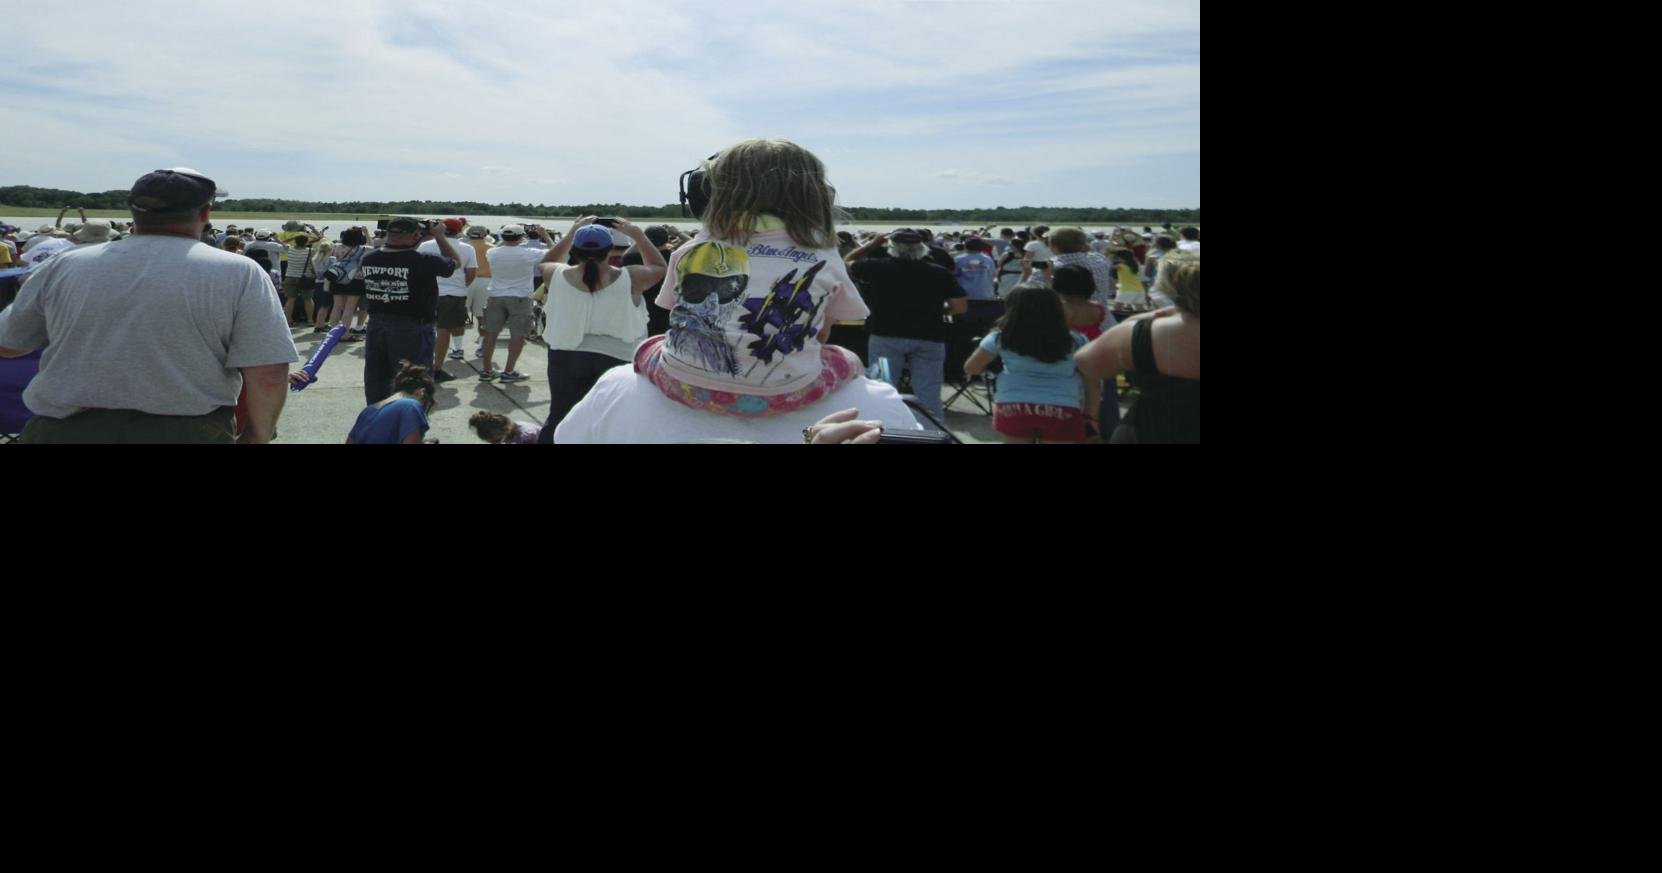 Crowds thrill to Pease air show New Hampshire